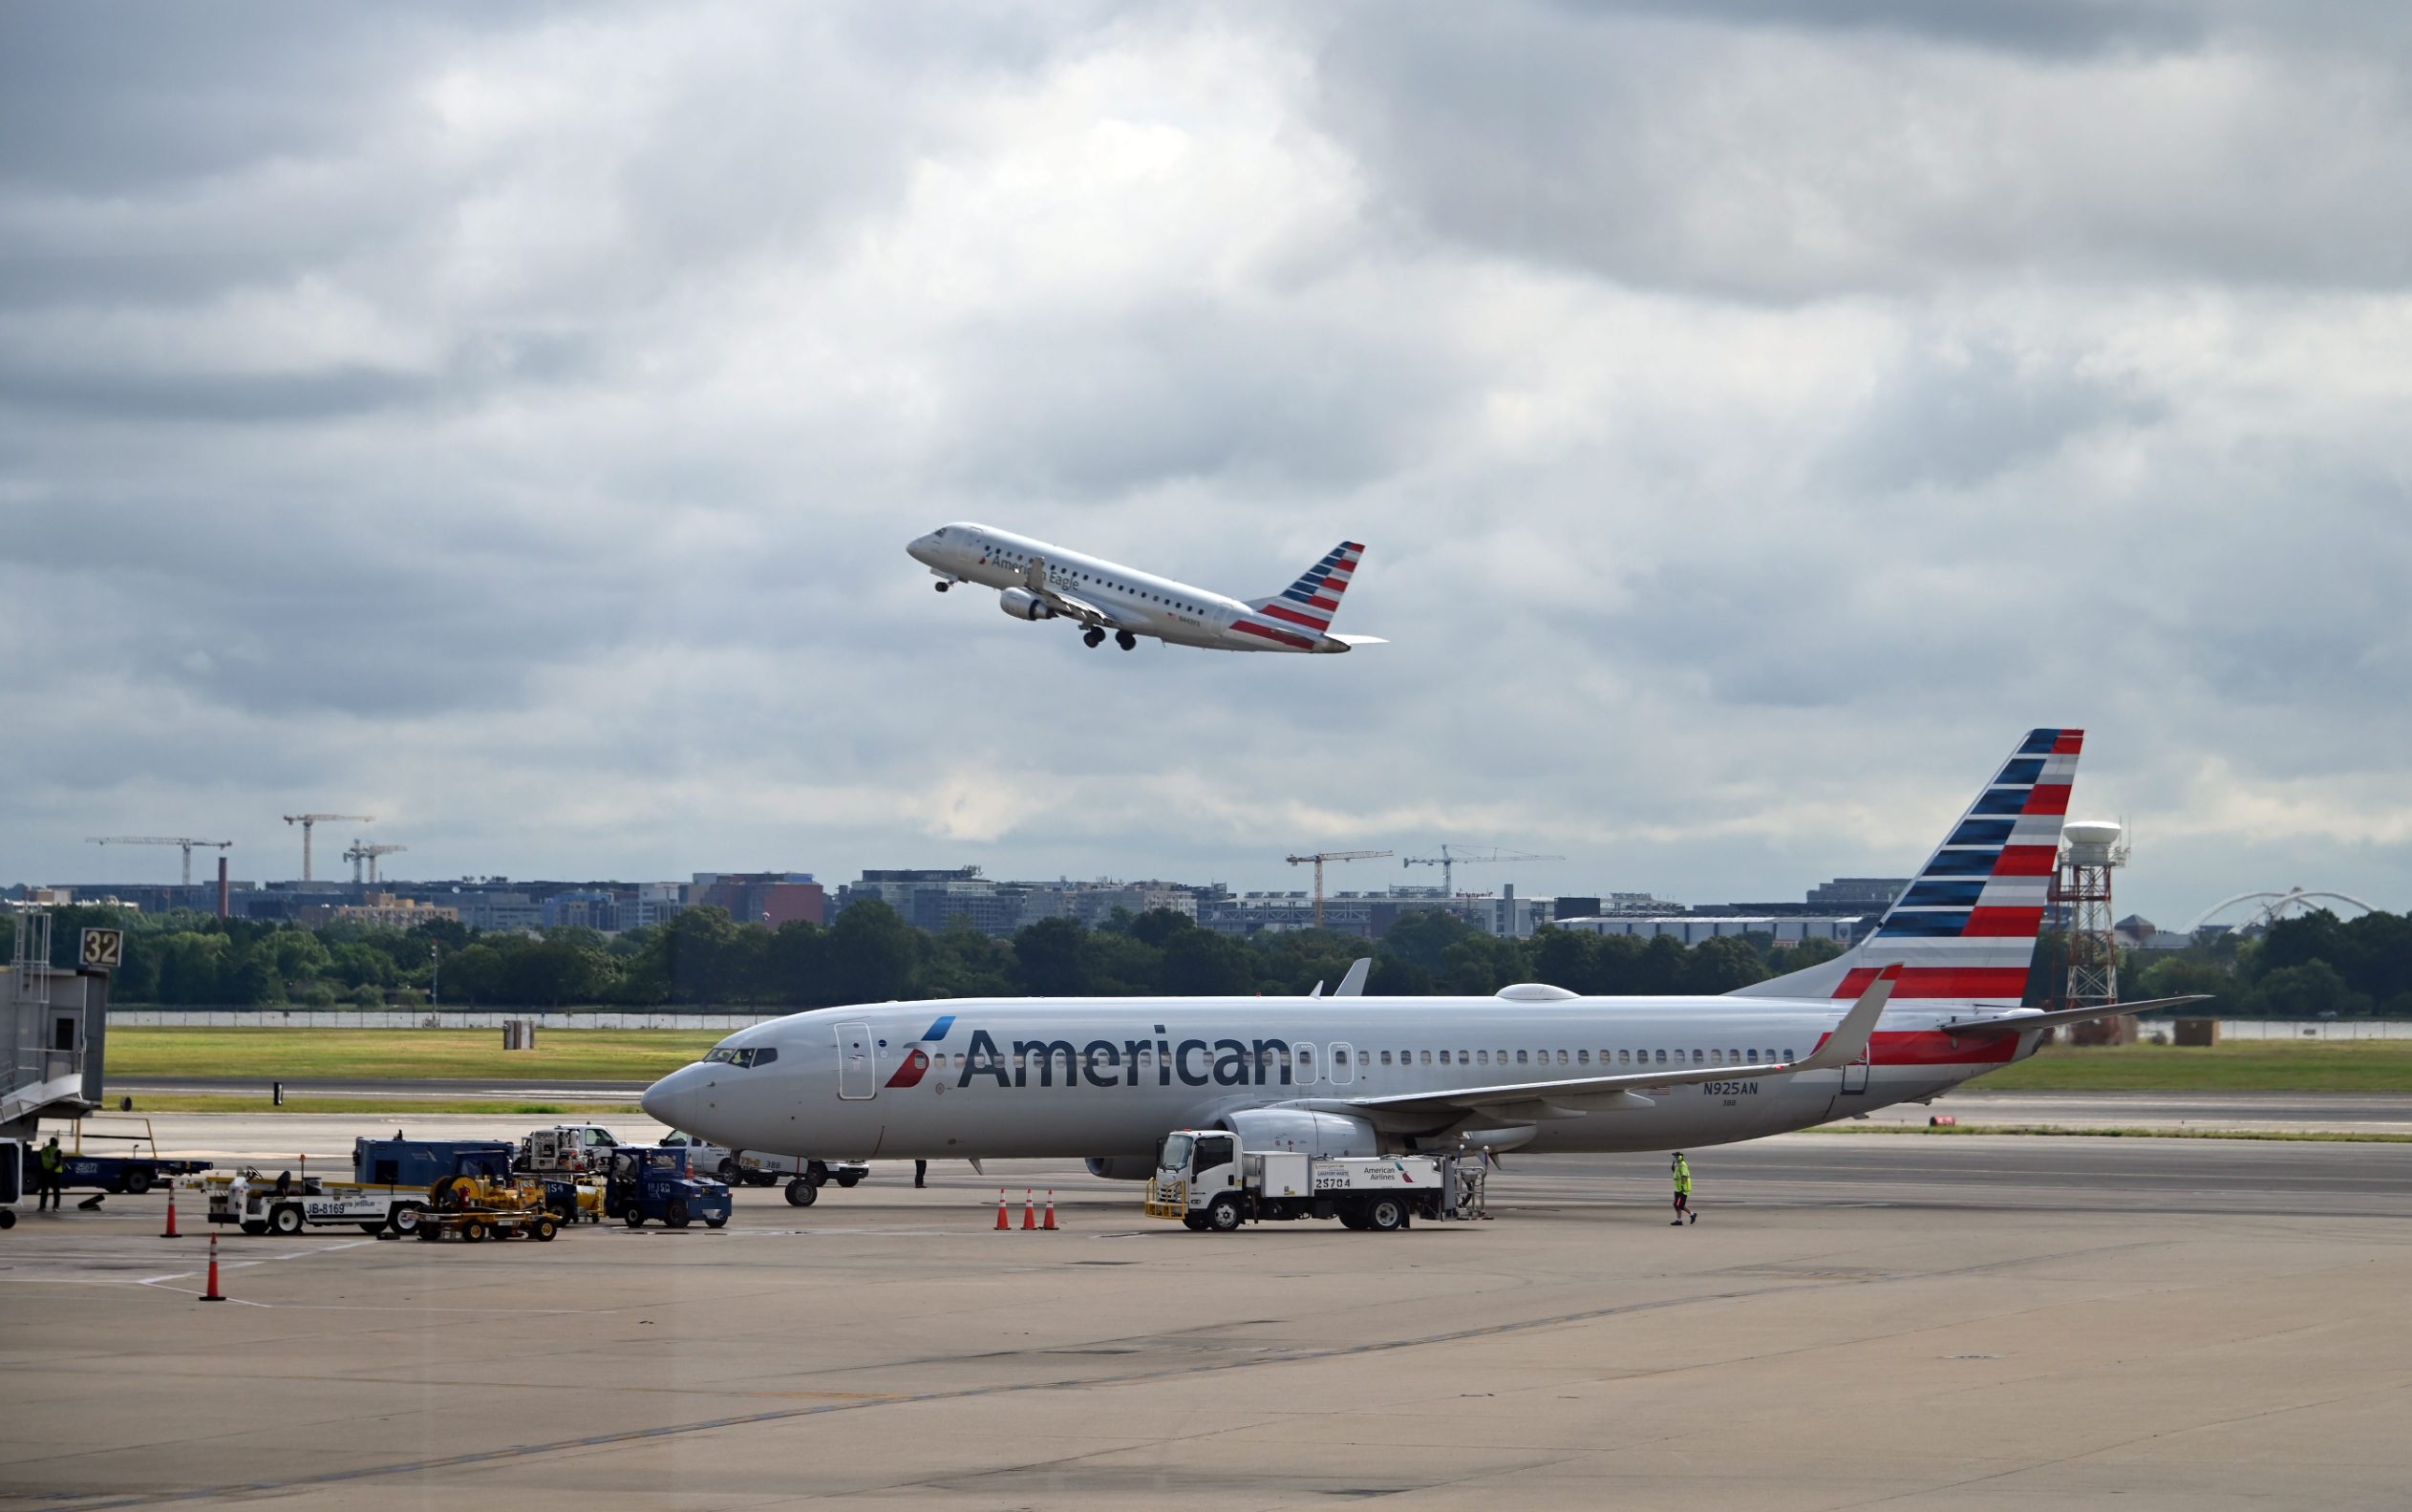 (FILES) In this file photo an American Eagle plane takes off while an American Airlines plane approaches a gate at Ronald Reagan Washington National Airport on July 10, 2020, in Arlington, Virginia, during the coronavirus pandemic. - American Airlines said on August 25, 2020 it will lay off 19,000 workers on October 1, in addition to thousands more who left the company or agreed to voluntary furloughs, unless Congress offers more aid. 